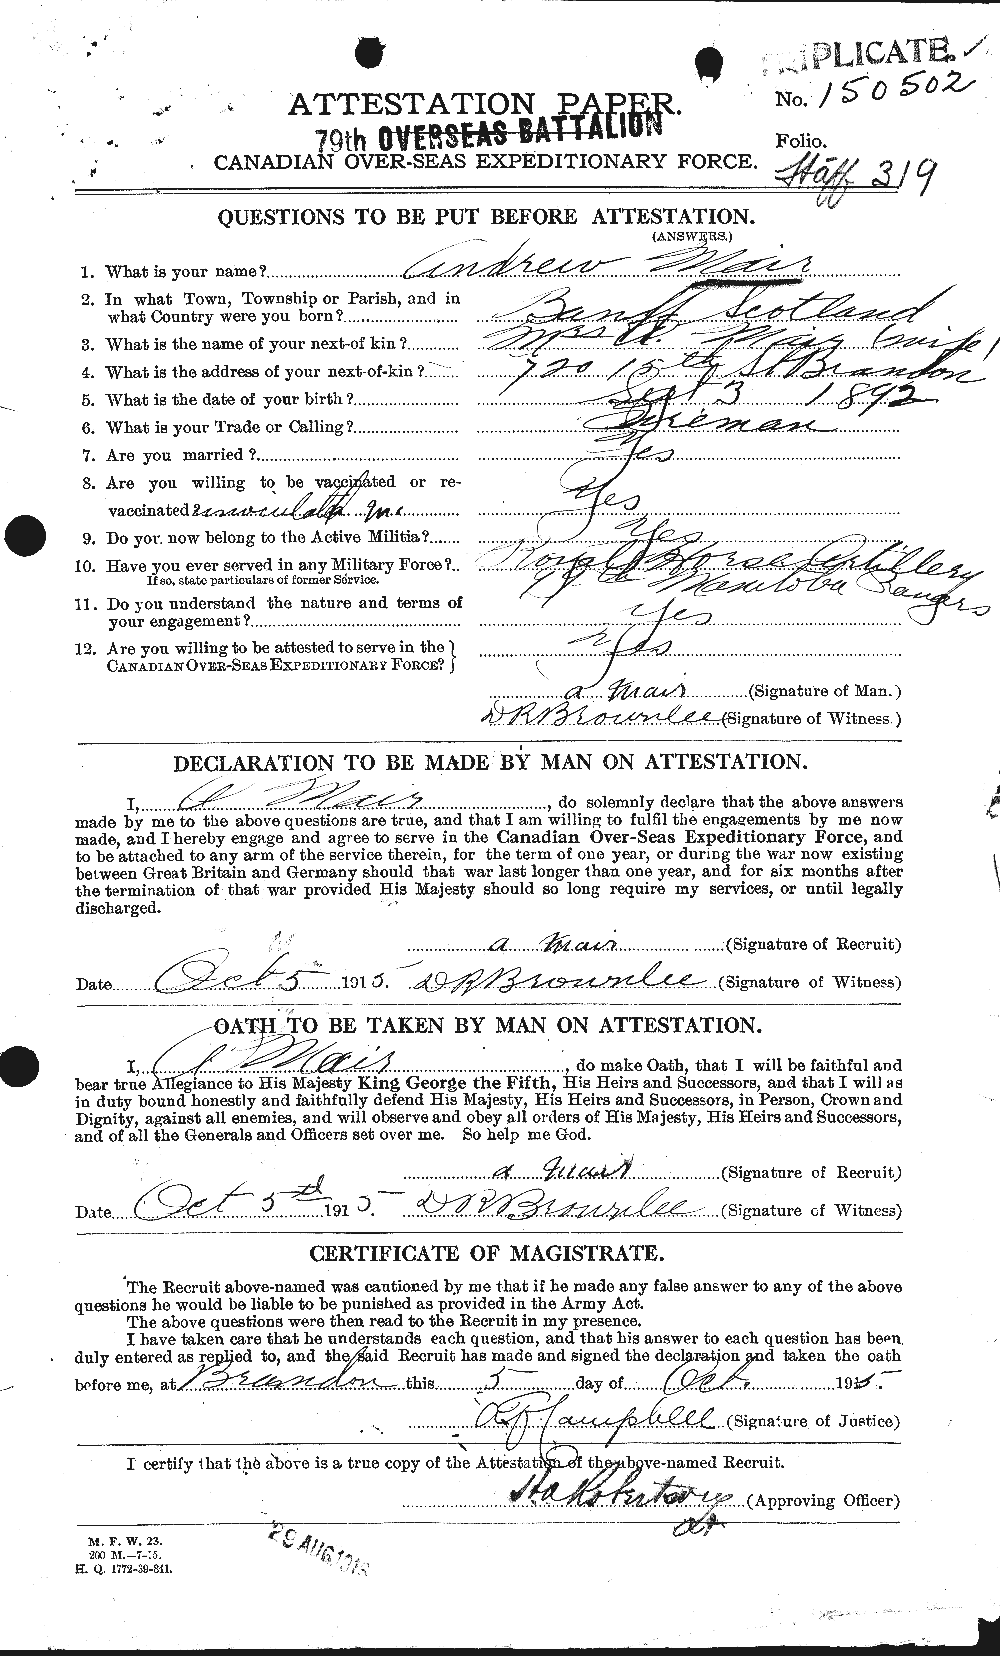 Personnel Records of the First World War - CEF 471573a